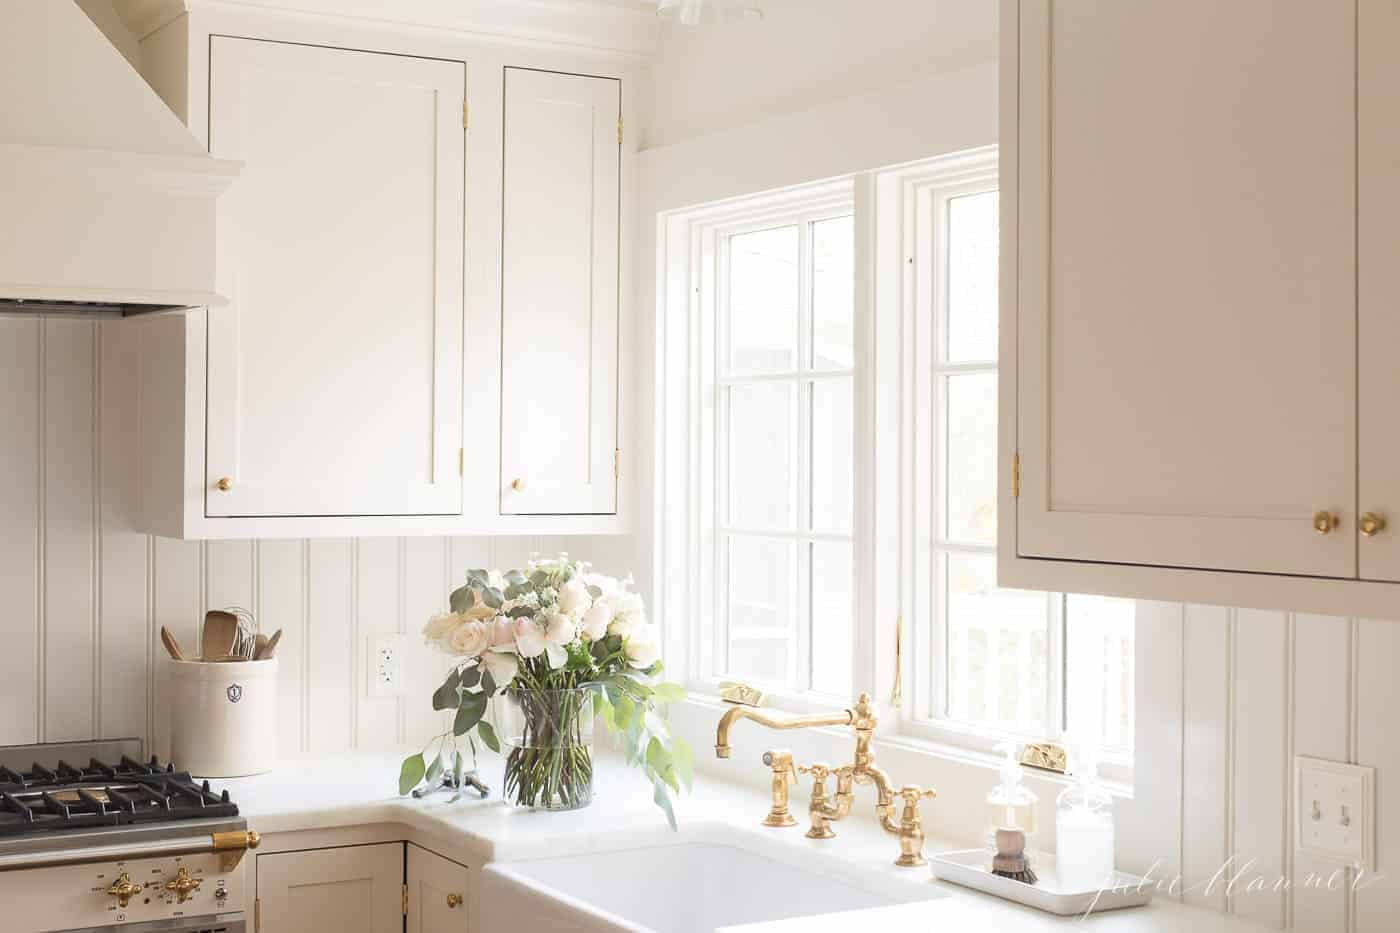 Cream inset cabinets in a kitchen with marble counters and a brass faucet.